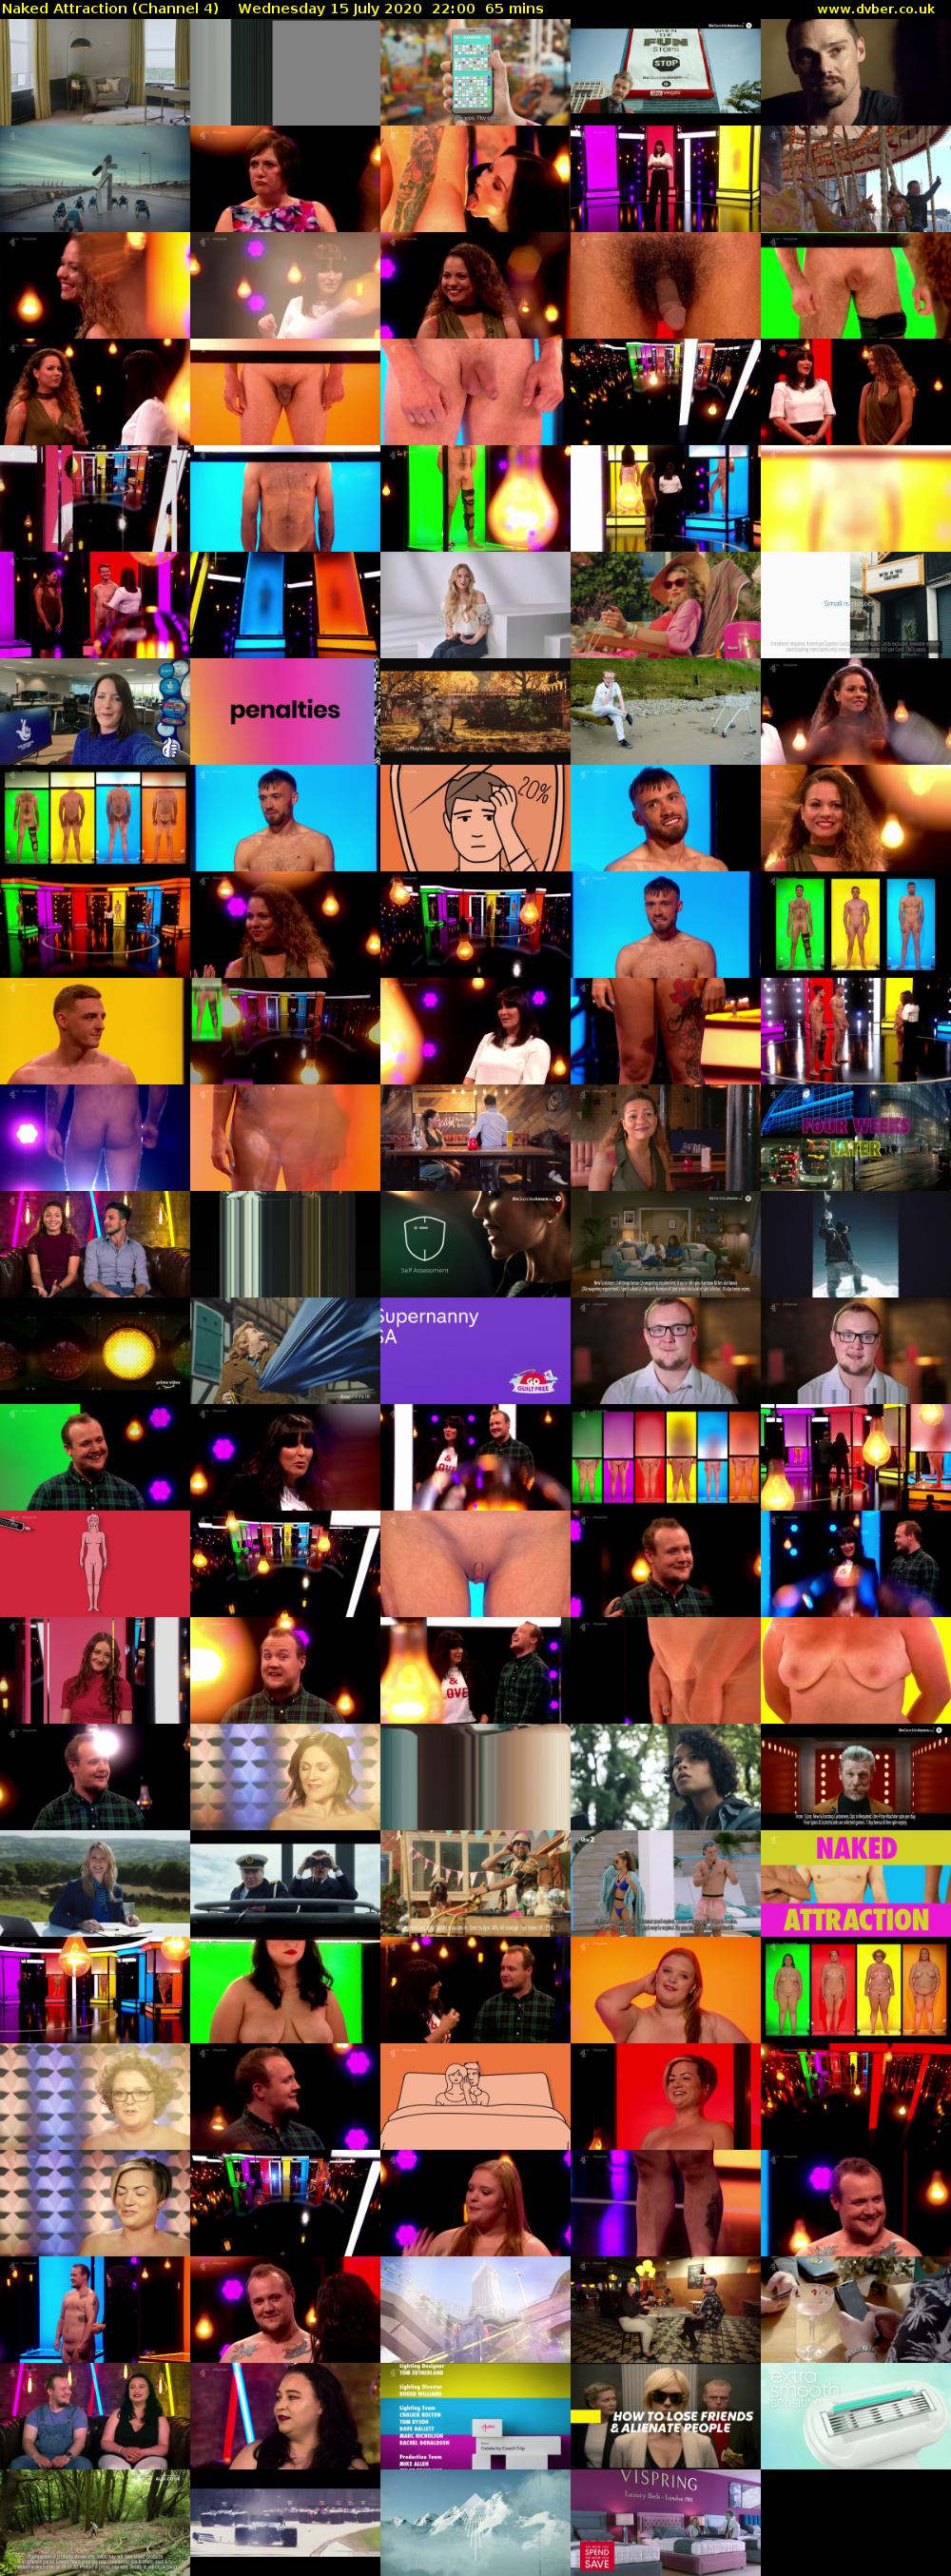 Naked Attraction (Channel 4) Wednesday 15 July 2020 22:00 - 23:05